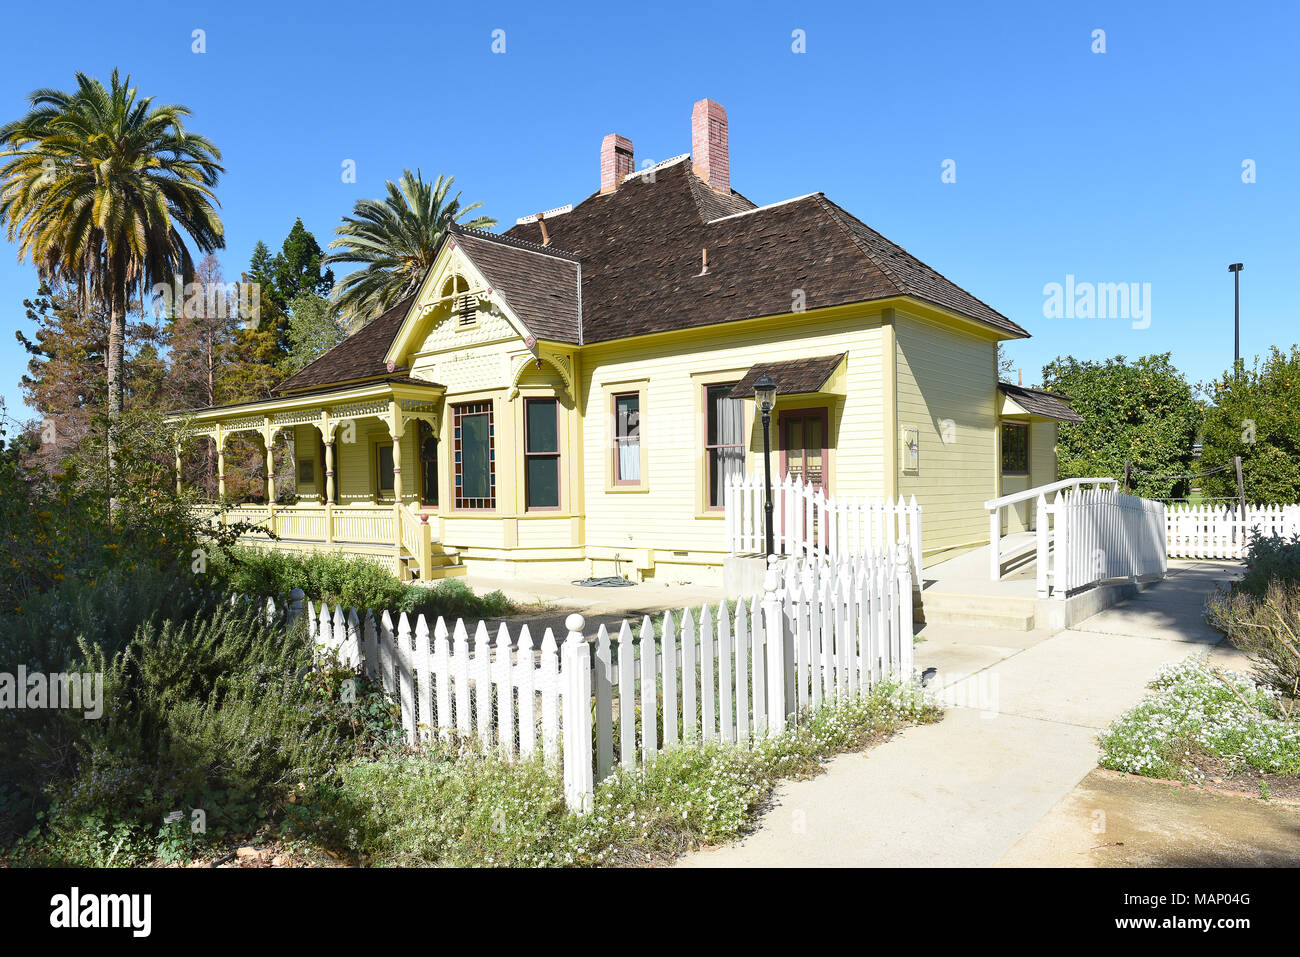 FULLERTON, CALIFORNIA - FEBRUARY 7, 2018: Fullerton Arboretum Heritage House. The house was built by Dr. George Crook Clark, in 1894. Stock Photo